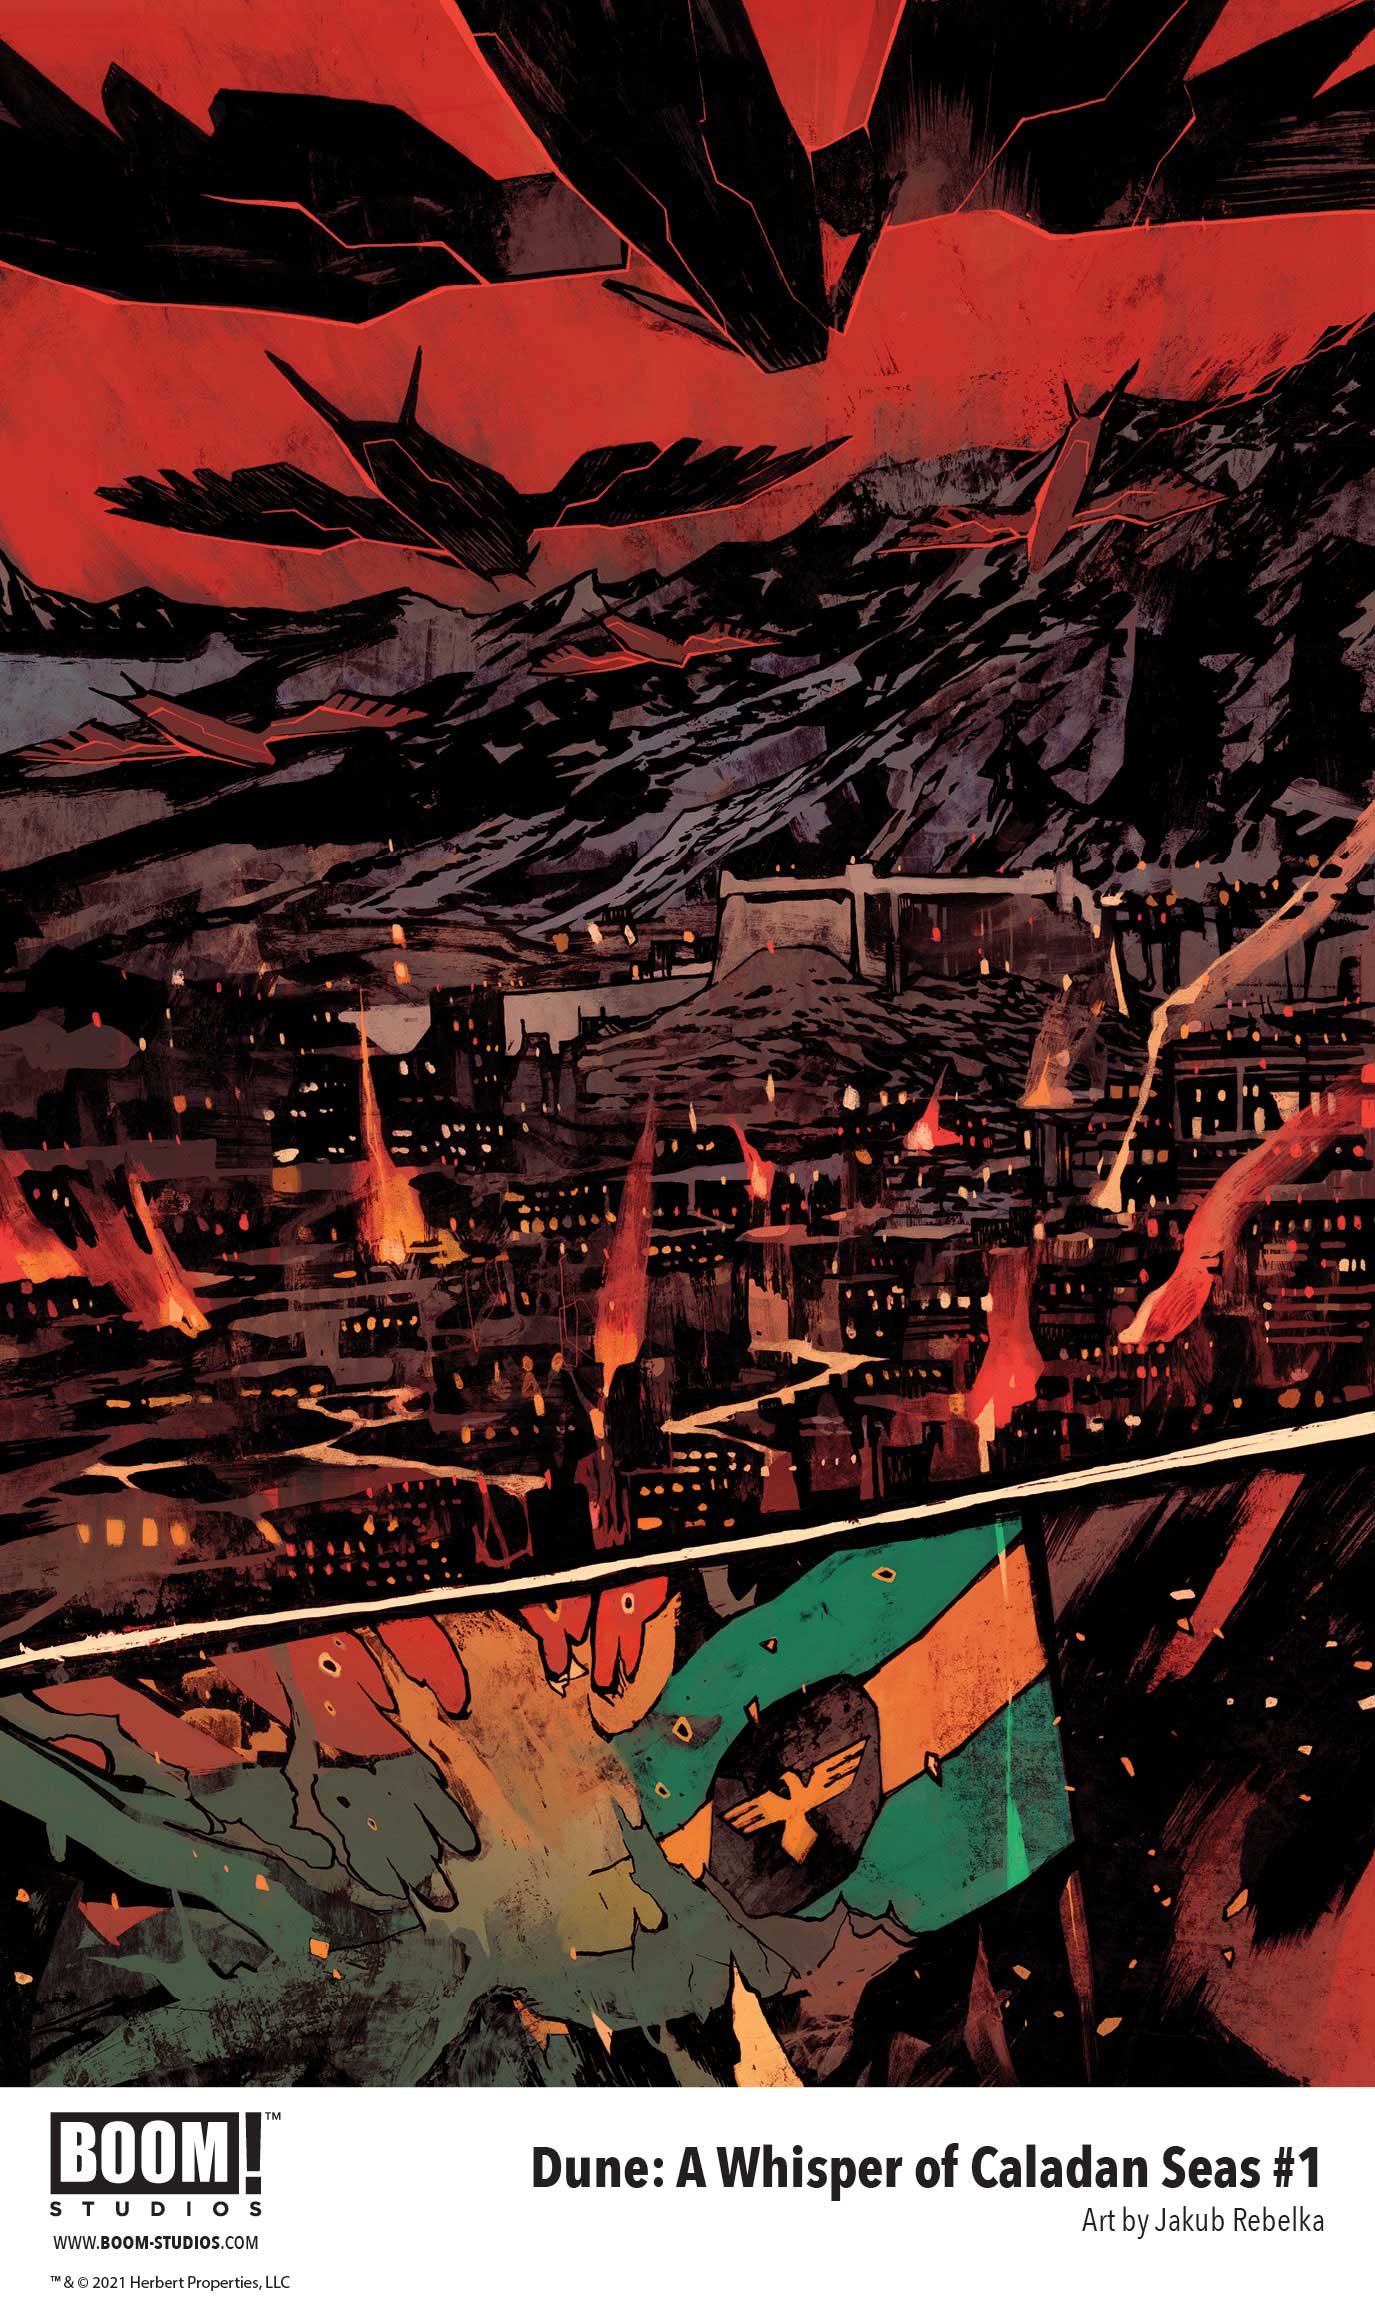 'Dune: A Whisper Of Caladan Seas' comic book. Interior artwork from page 01, depicting Harkonnen ornithopters flying above the embattled city of Arrakeen.